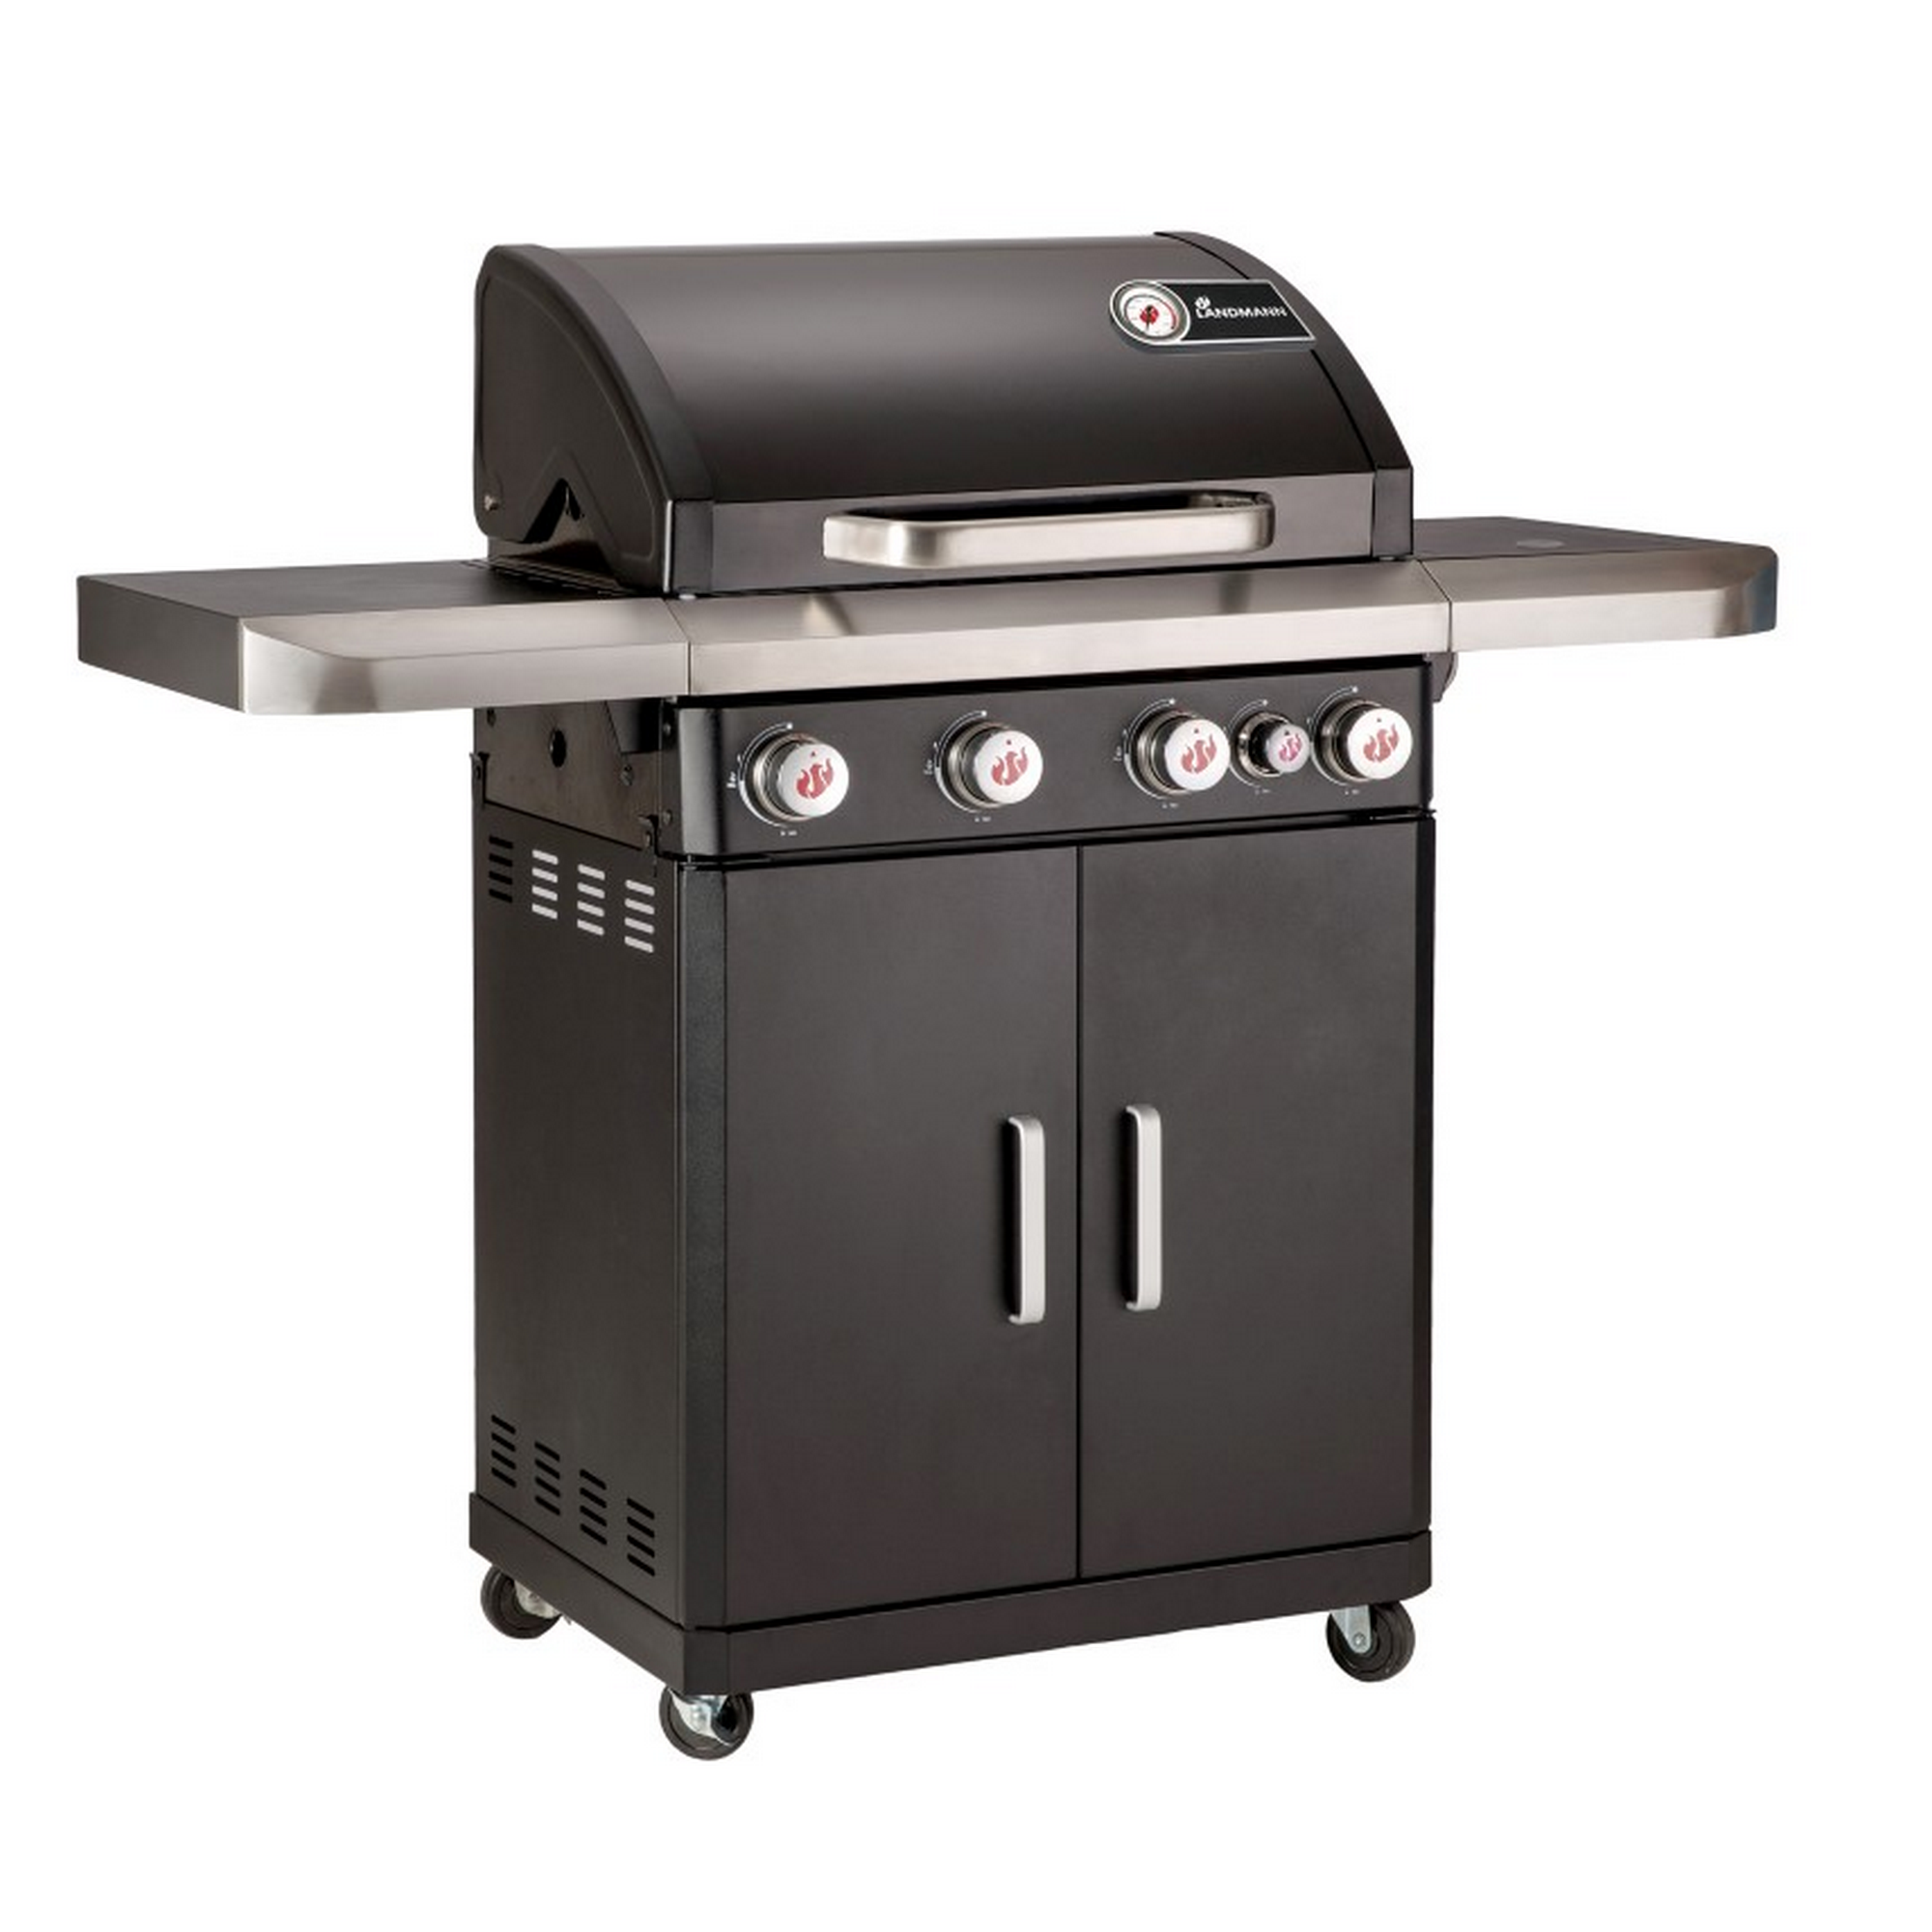 Gasgrill 'Rexon PTS BR 4.1' schwarz/silbern 120 x 135 x 52 cm + product picture